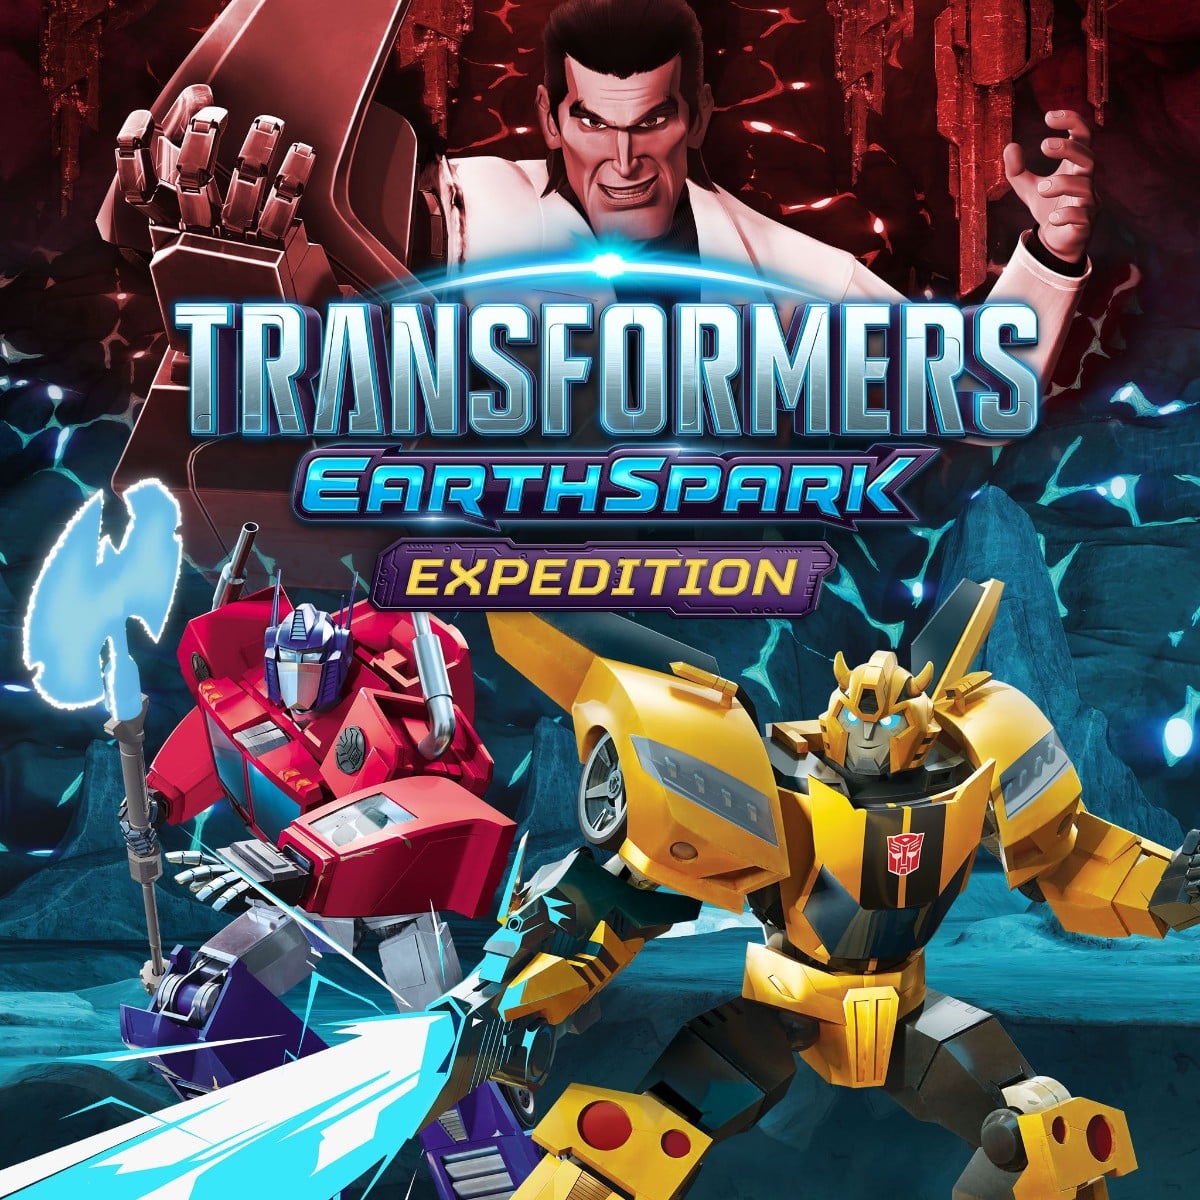 Transformers Earthspark Expedition game switch nintendo review